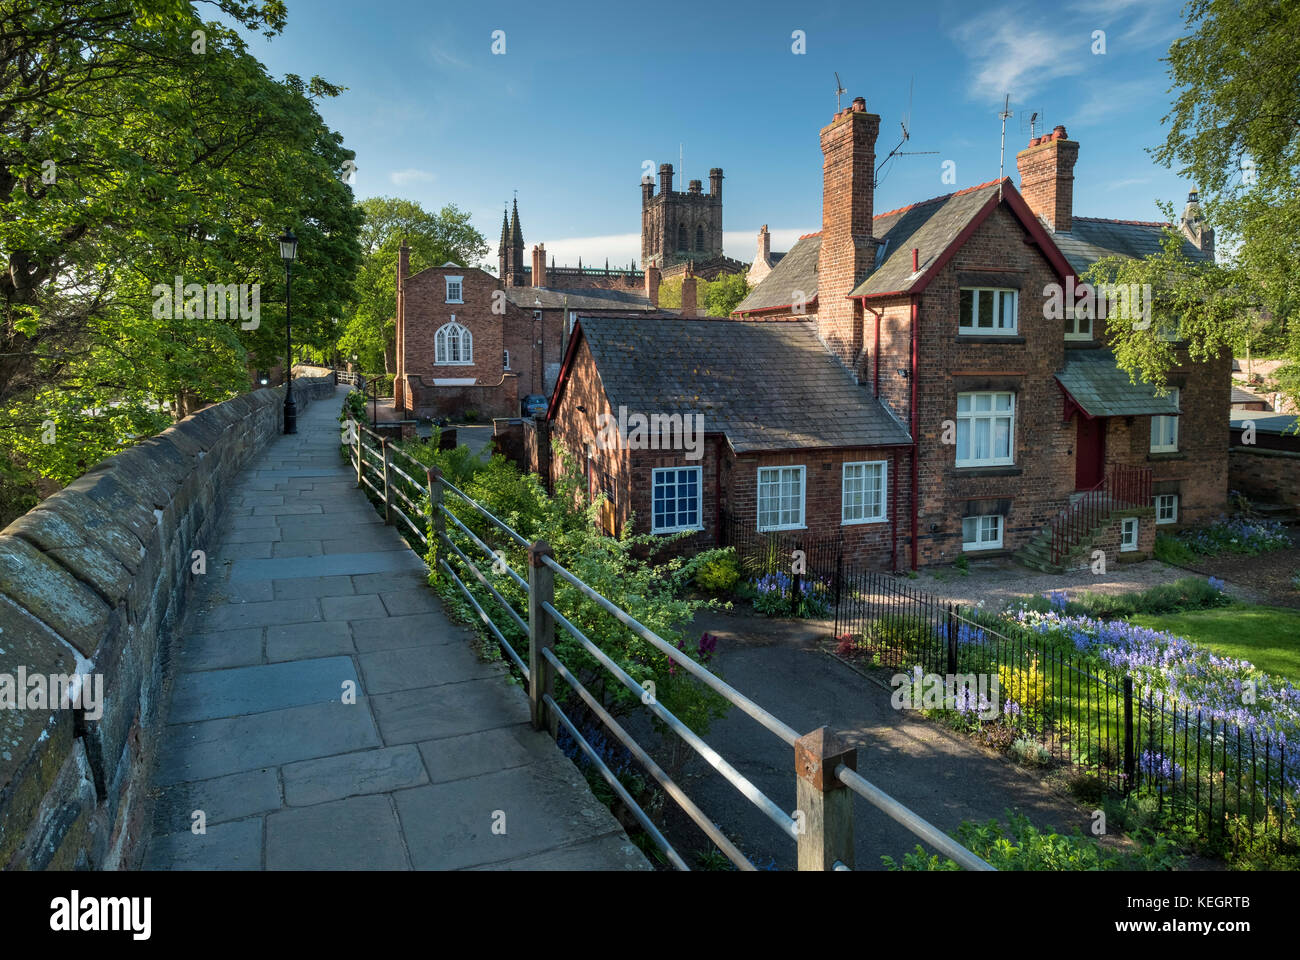 Fortifications de Chester au printemps, Chester, Cheshire, Angleterre, RU Banque D'Images